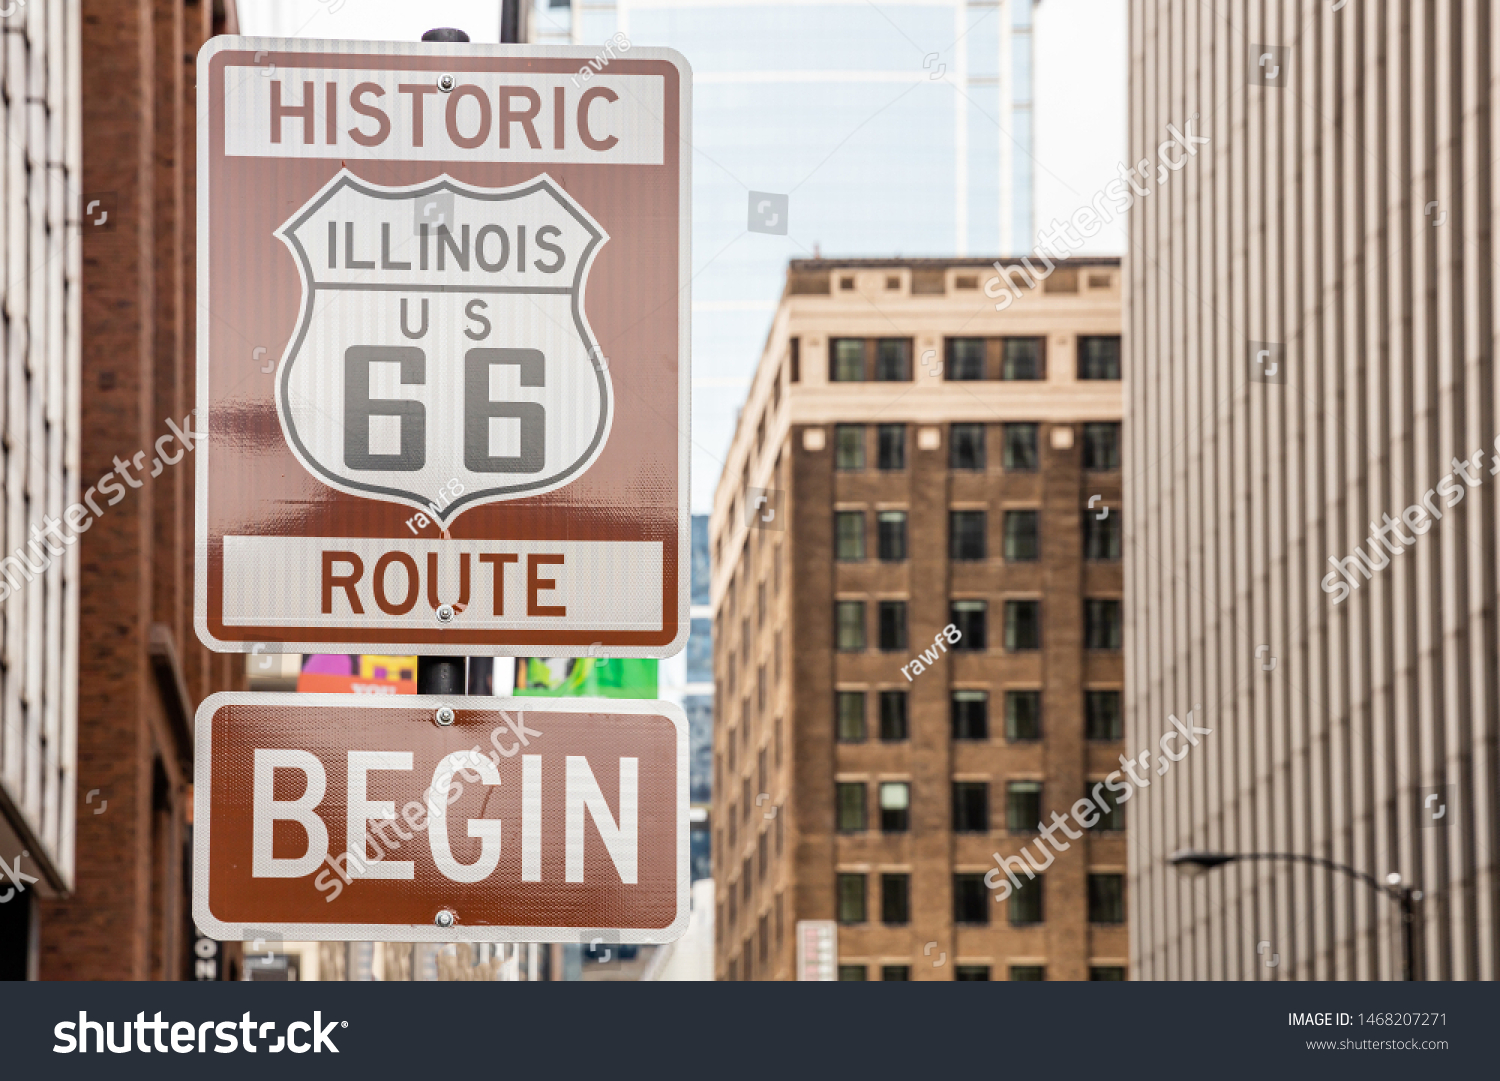 Route 66 Illinois Begin road sign at Chicago city downtown. Buildings facade background. Route 66, mother road, the classic historic roadtrip in USA #1468207271